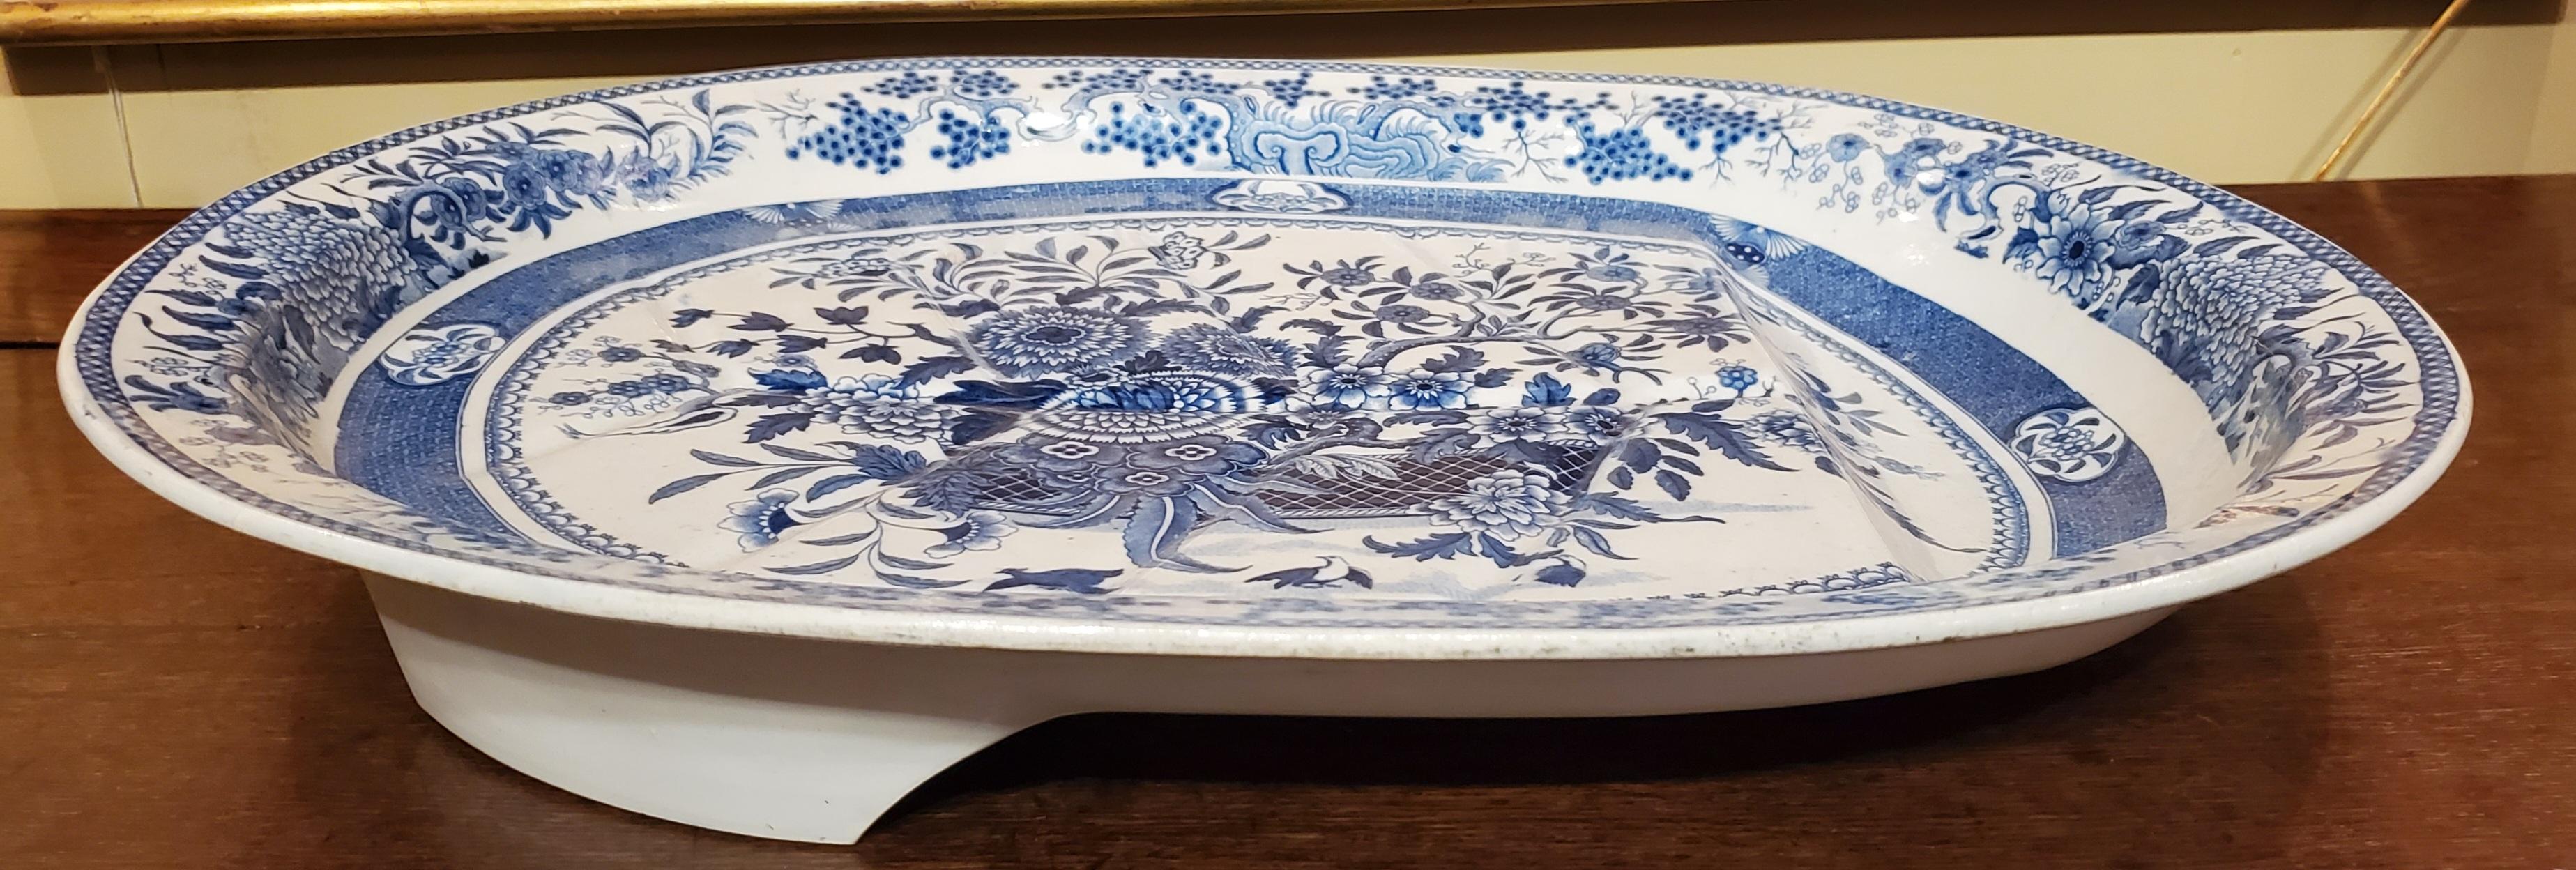 Antique English Spode meat tray with well, circa 1860.

  